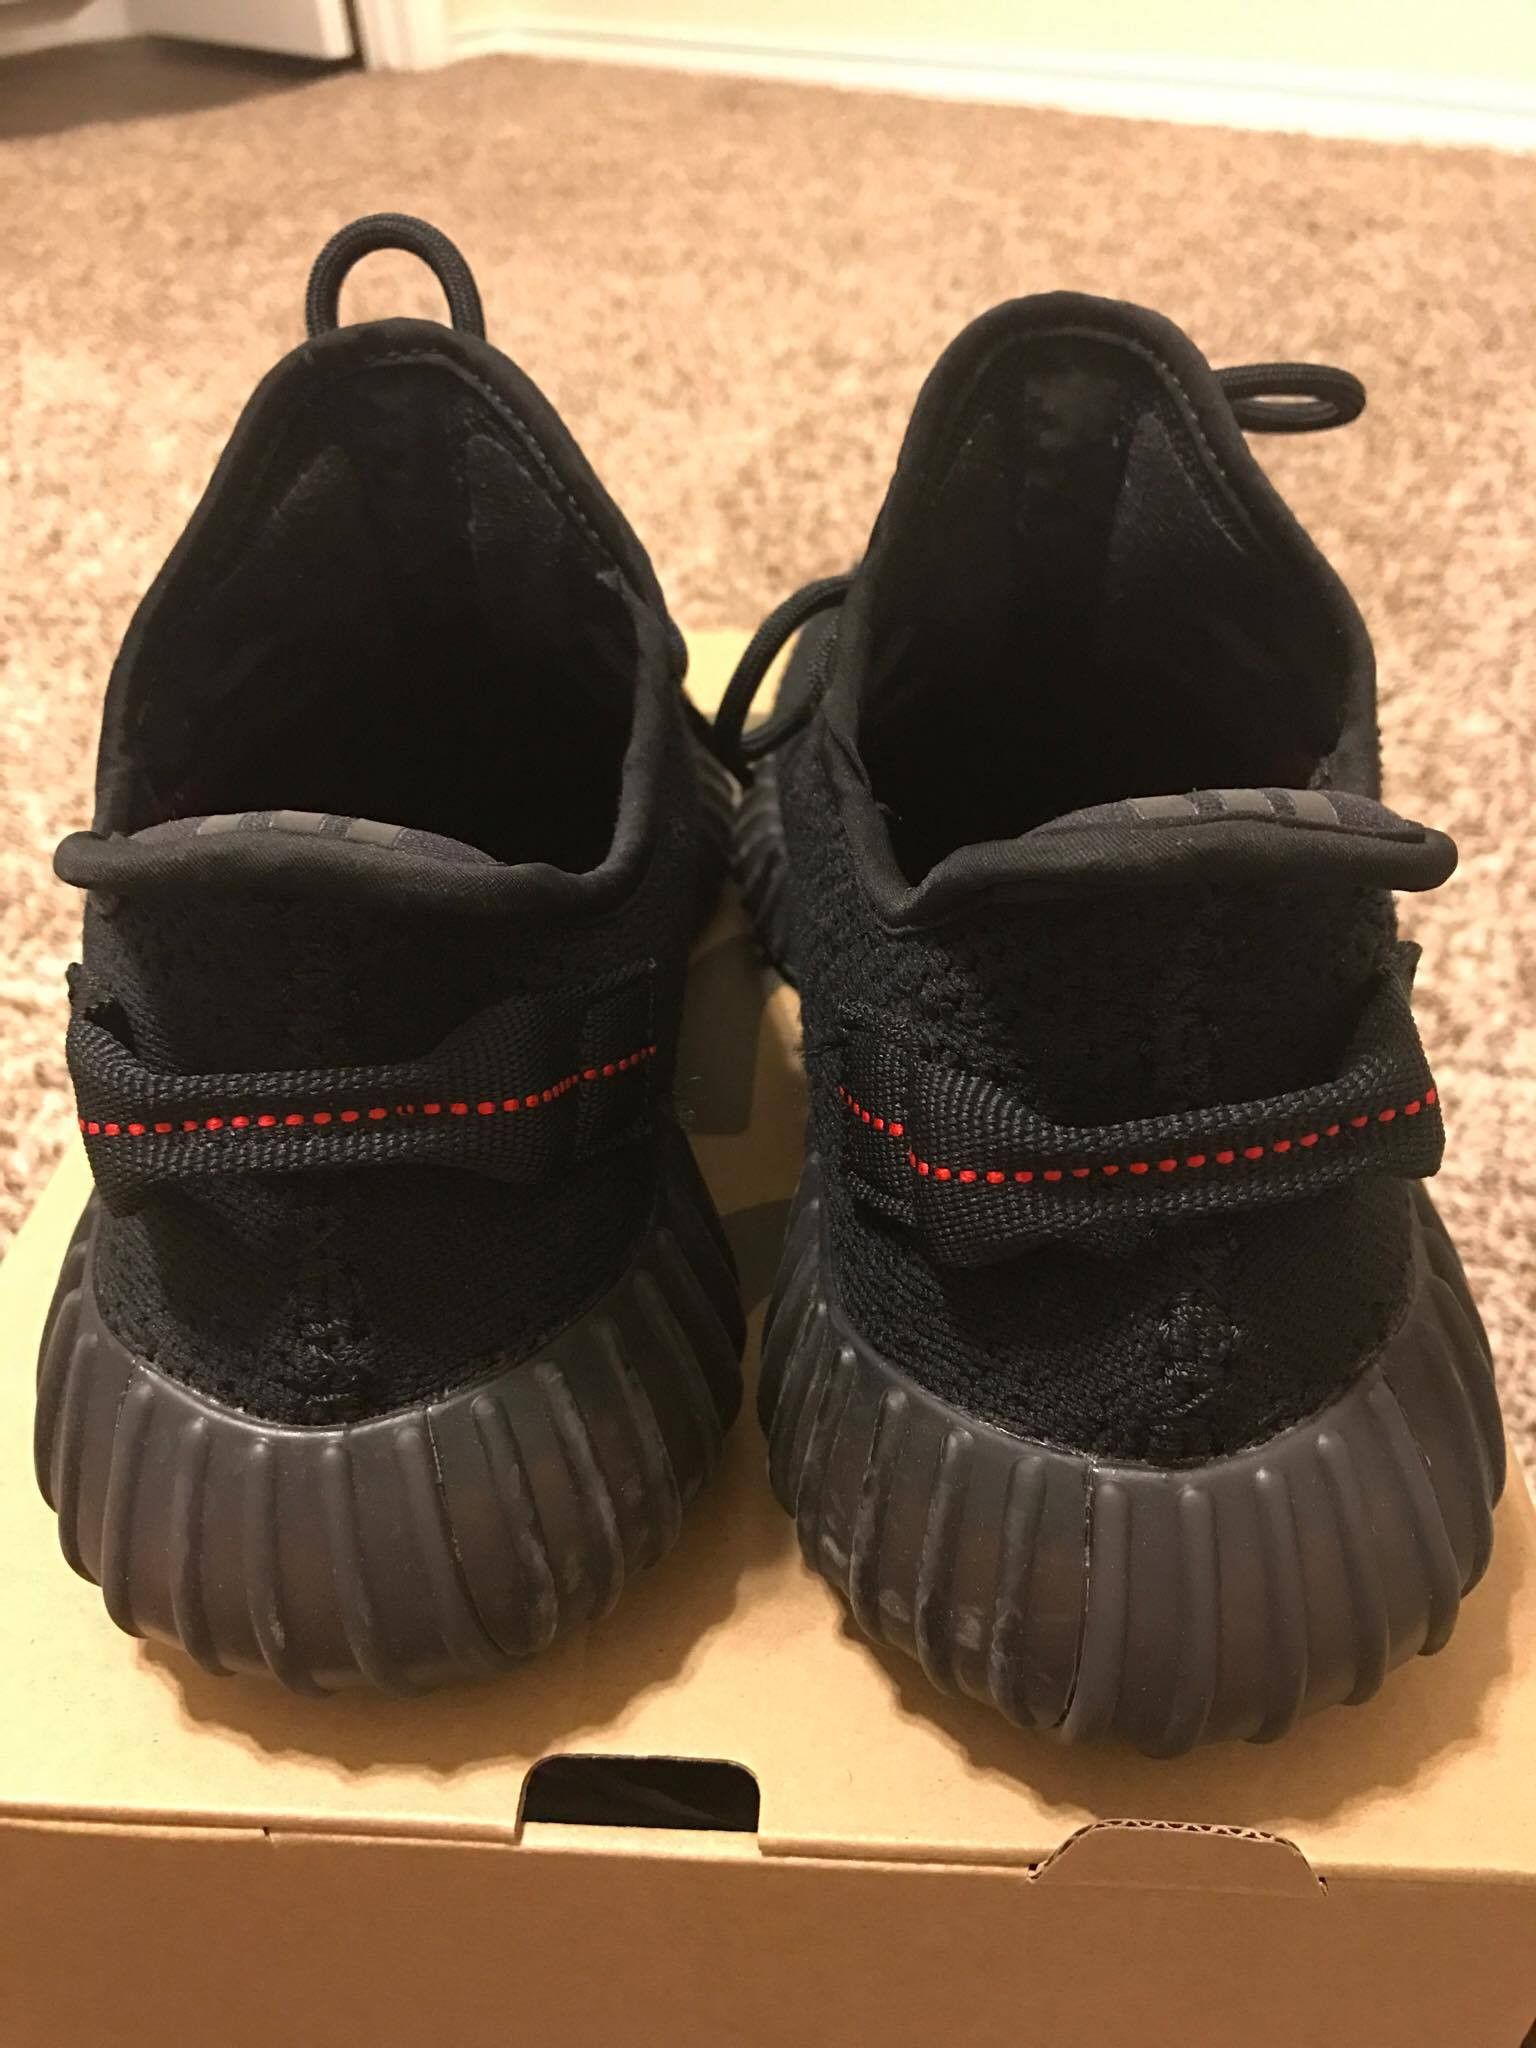 Adidas ADIDAS YEEZY BOOST 350 V2 BLACK RED BRED CP9652 LEGIT with Adidas receipt-Sz 9 Size US 9 / EU 42 - 6 Preview